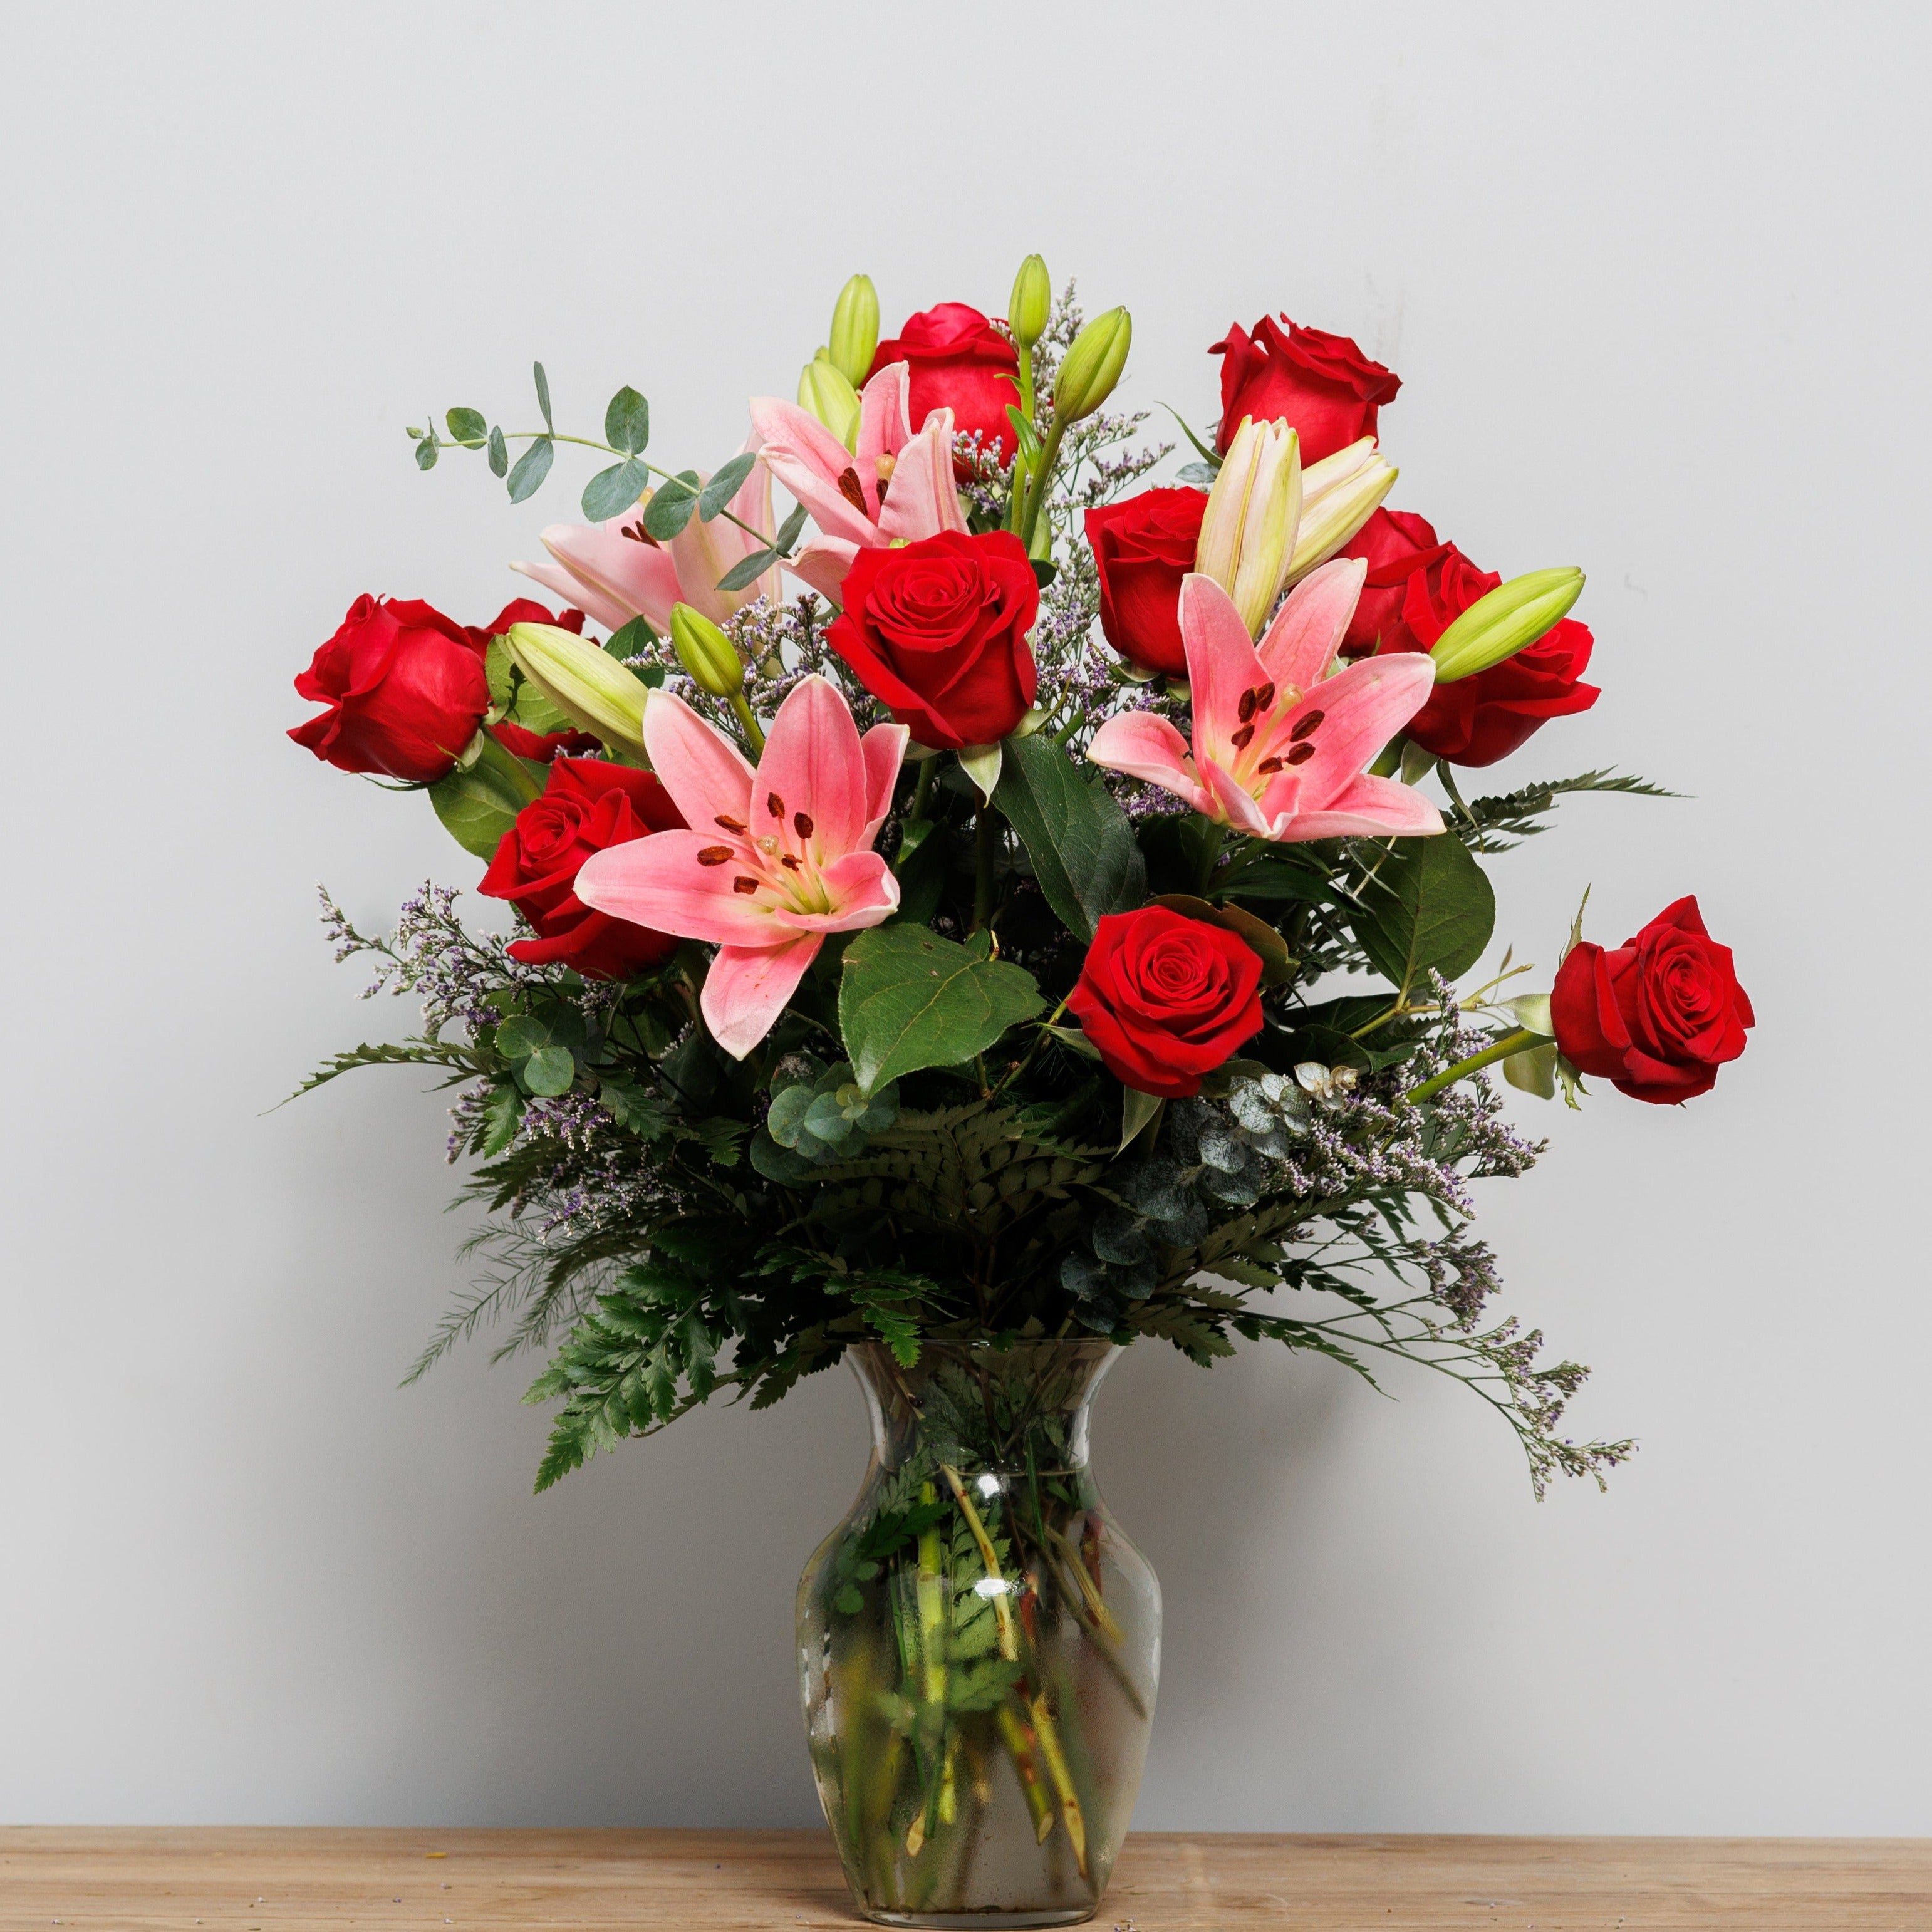 A vase arrangement with red roses and pink lilies.